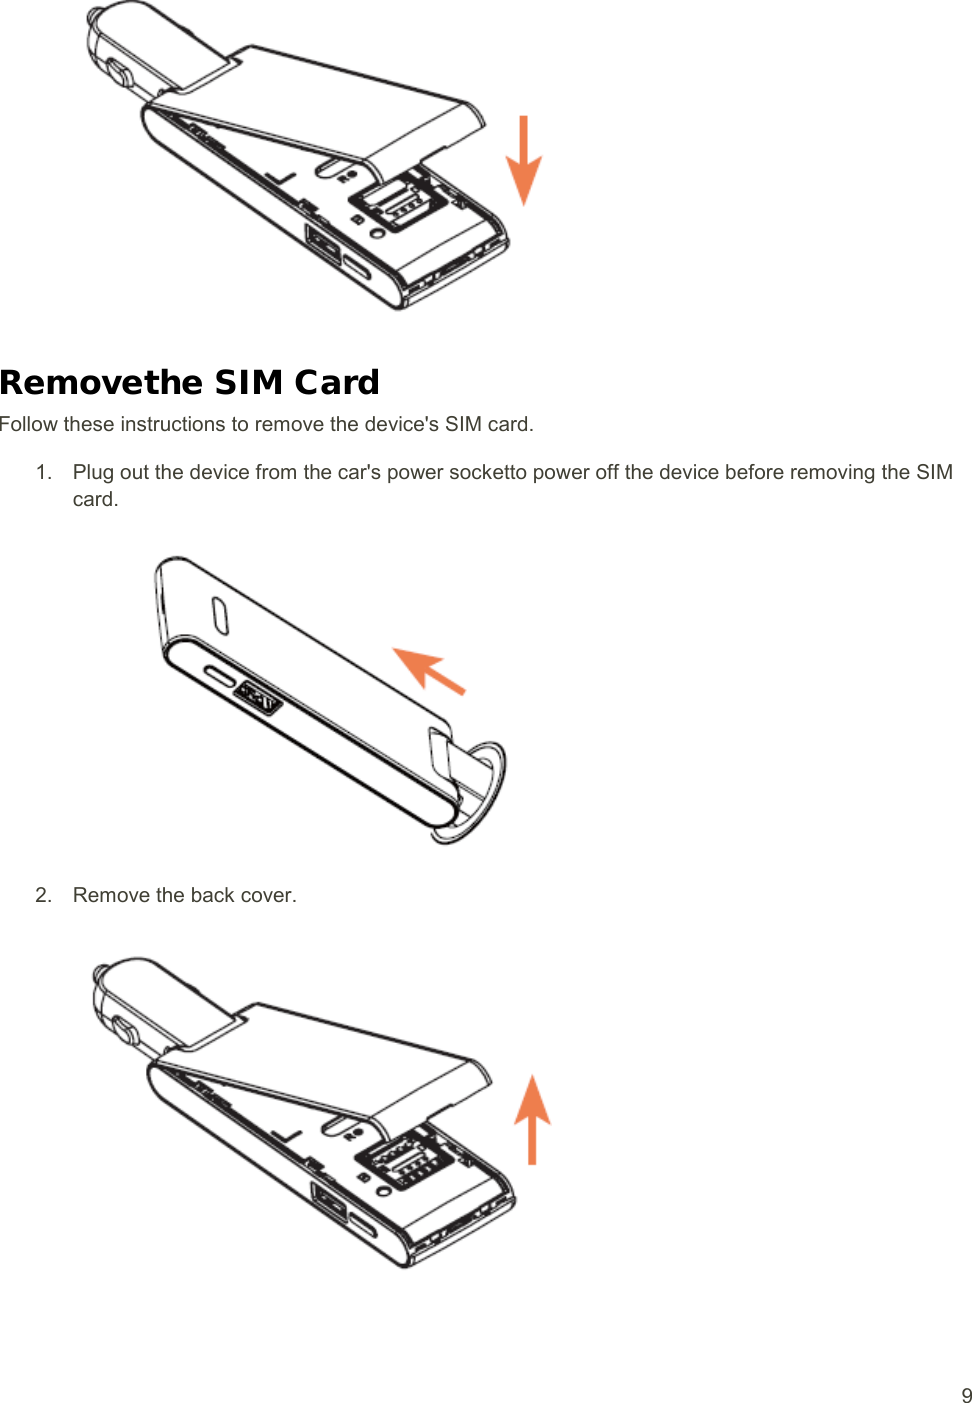   9  Removethe SIM Card Follow these instructions to remove the device&apos;s SIM card.  1. Plug out the device from the car&apos;s power socketto power off the device before removing the SIM card.  2. Remove the back cover.   